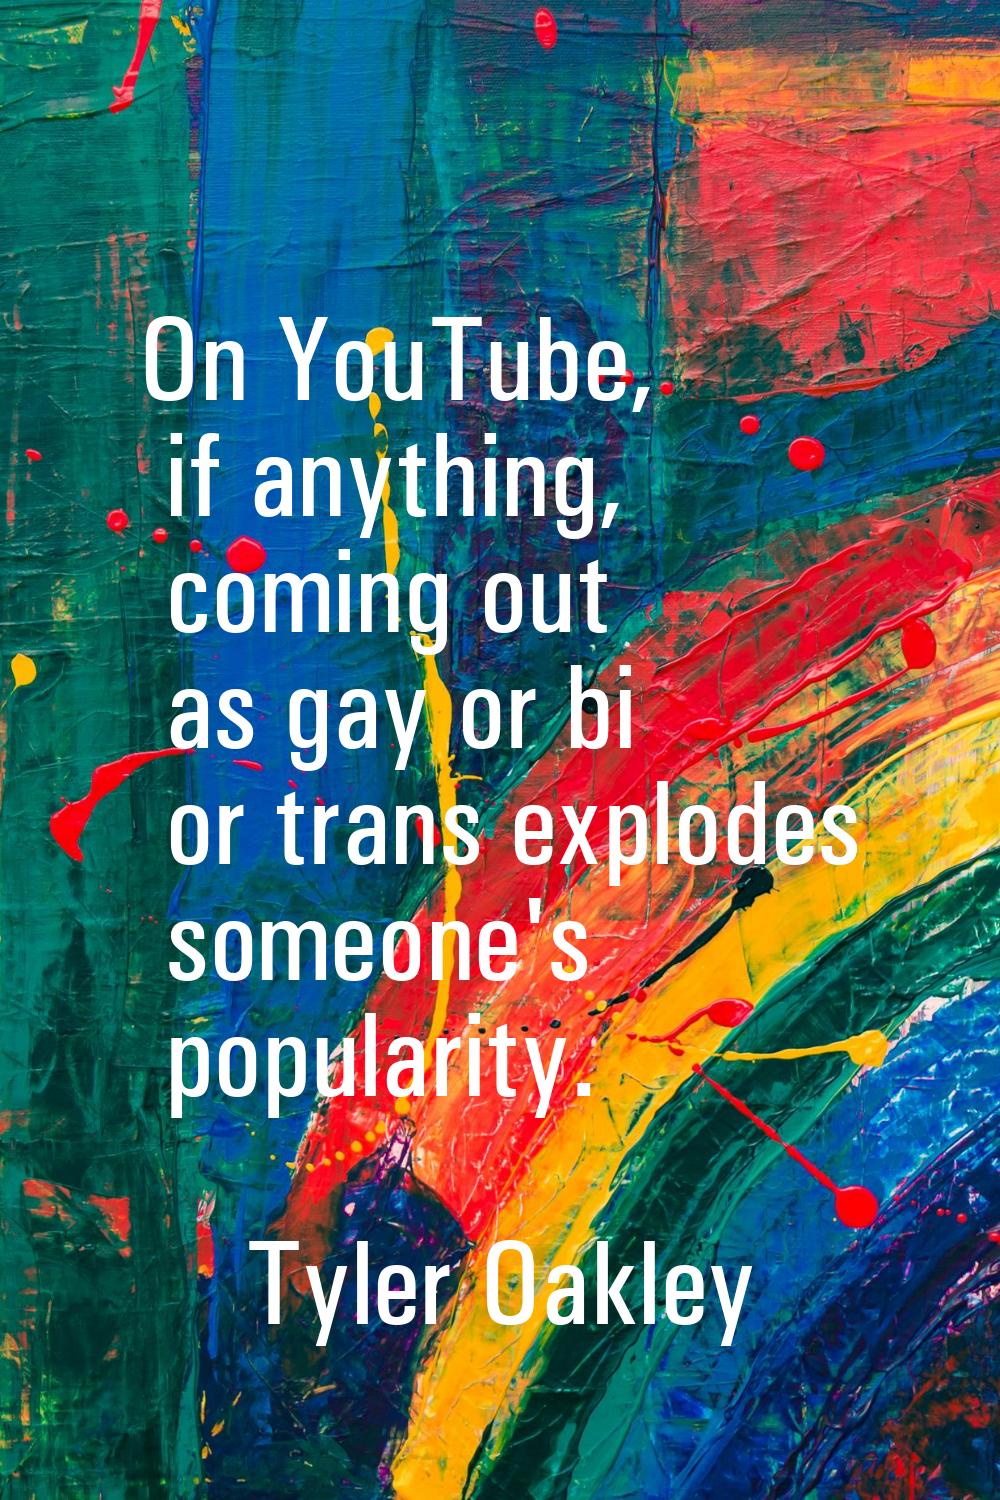 On YouTube, if anything, coming out as gay or bi or trans explodes someone's popularity.